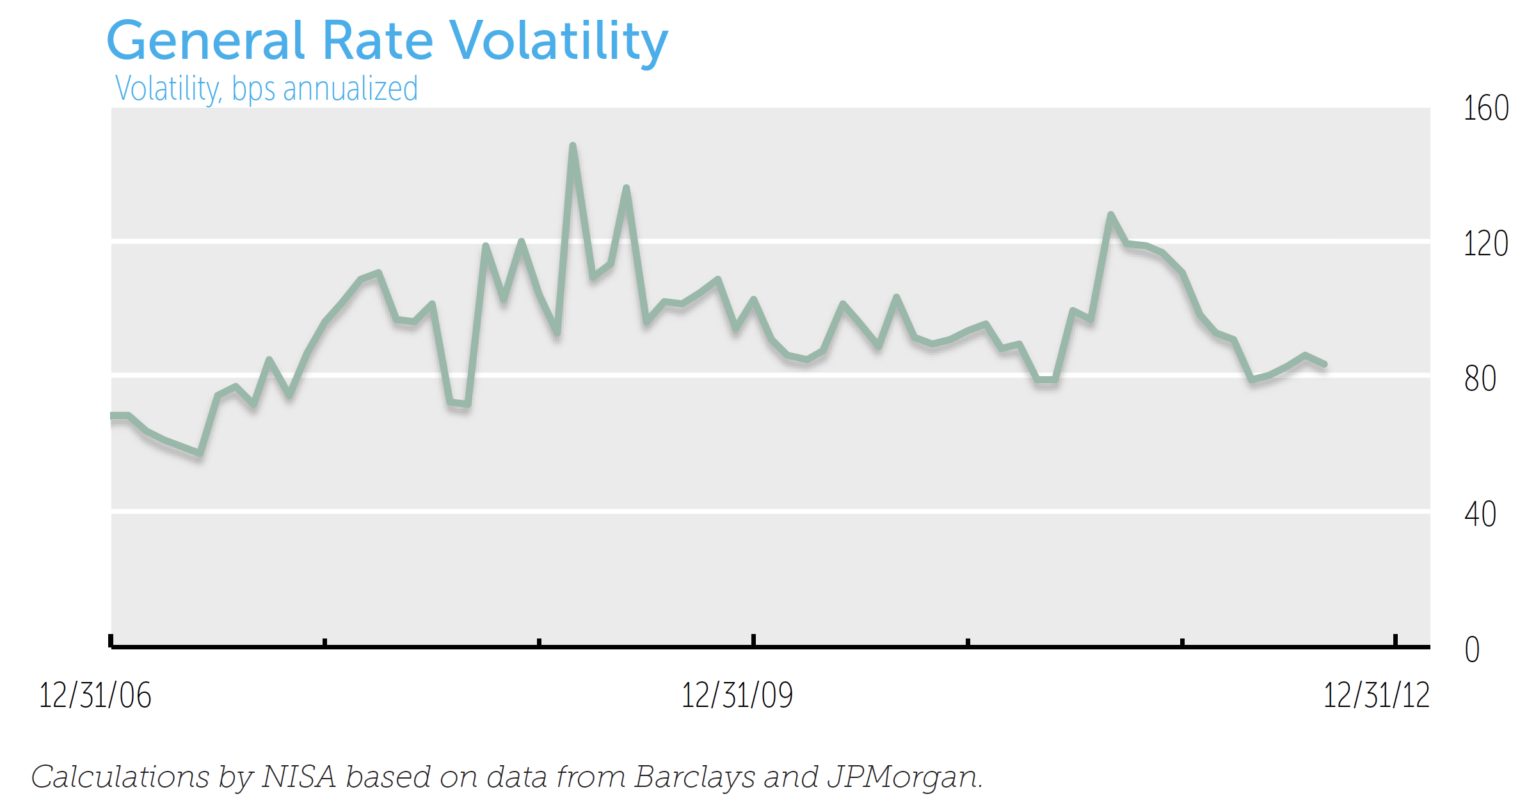 General Rate Volatility